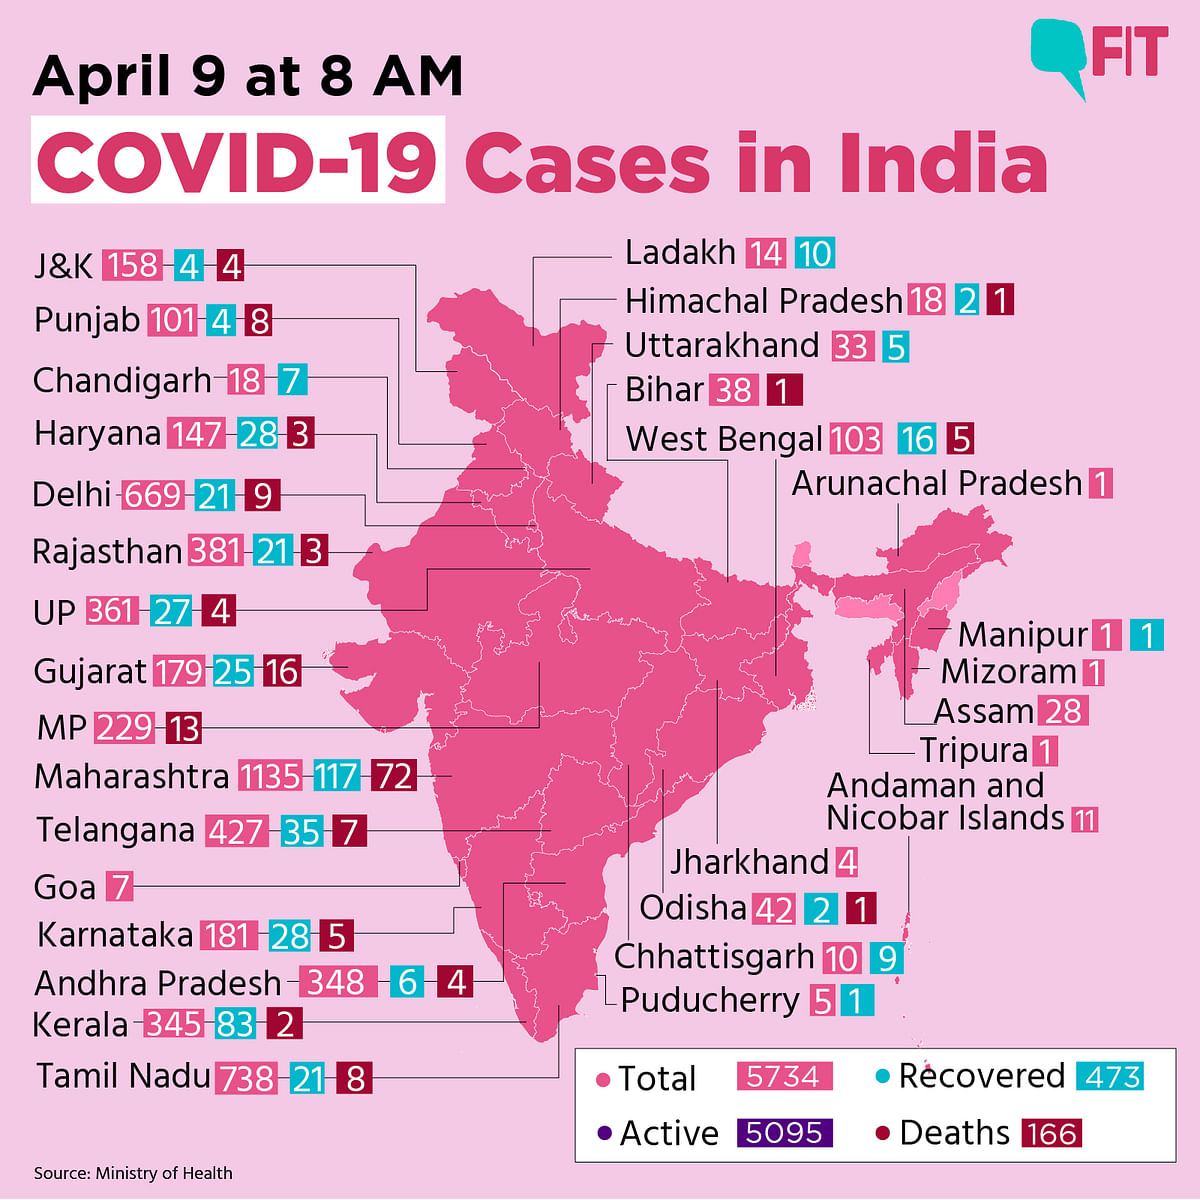 COVID-19 India Update: 5, 734 Total Cases, Death Toll at 166